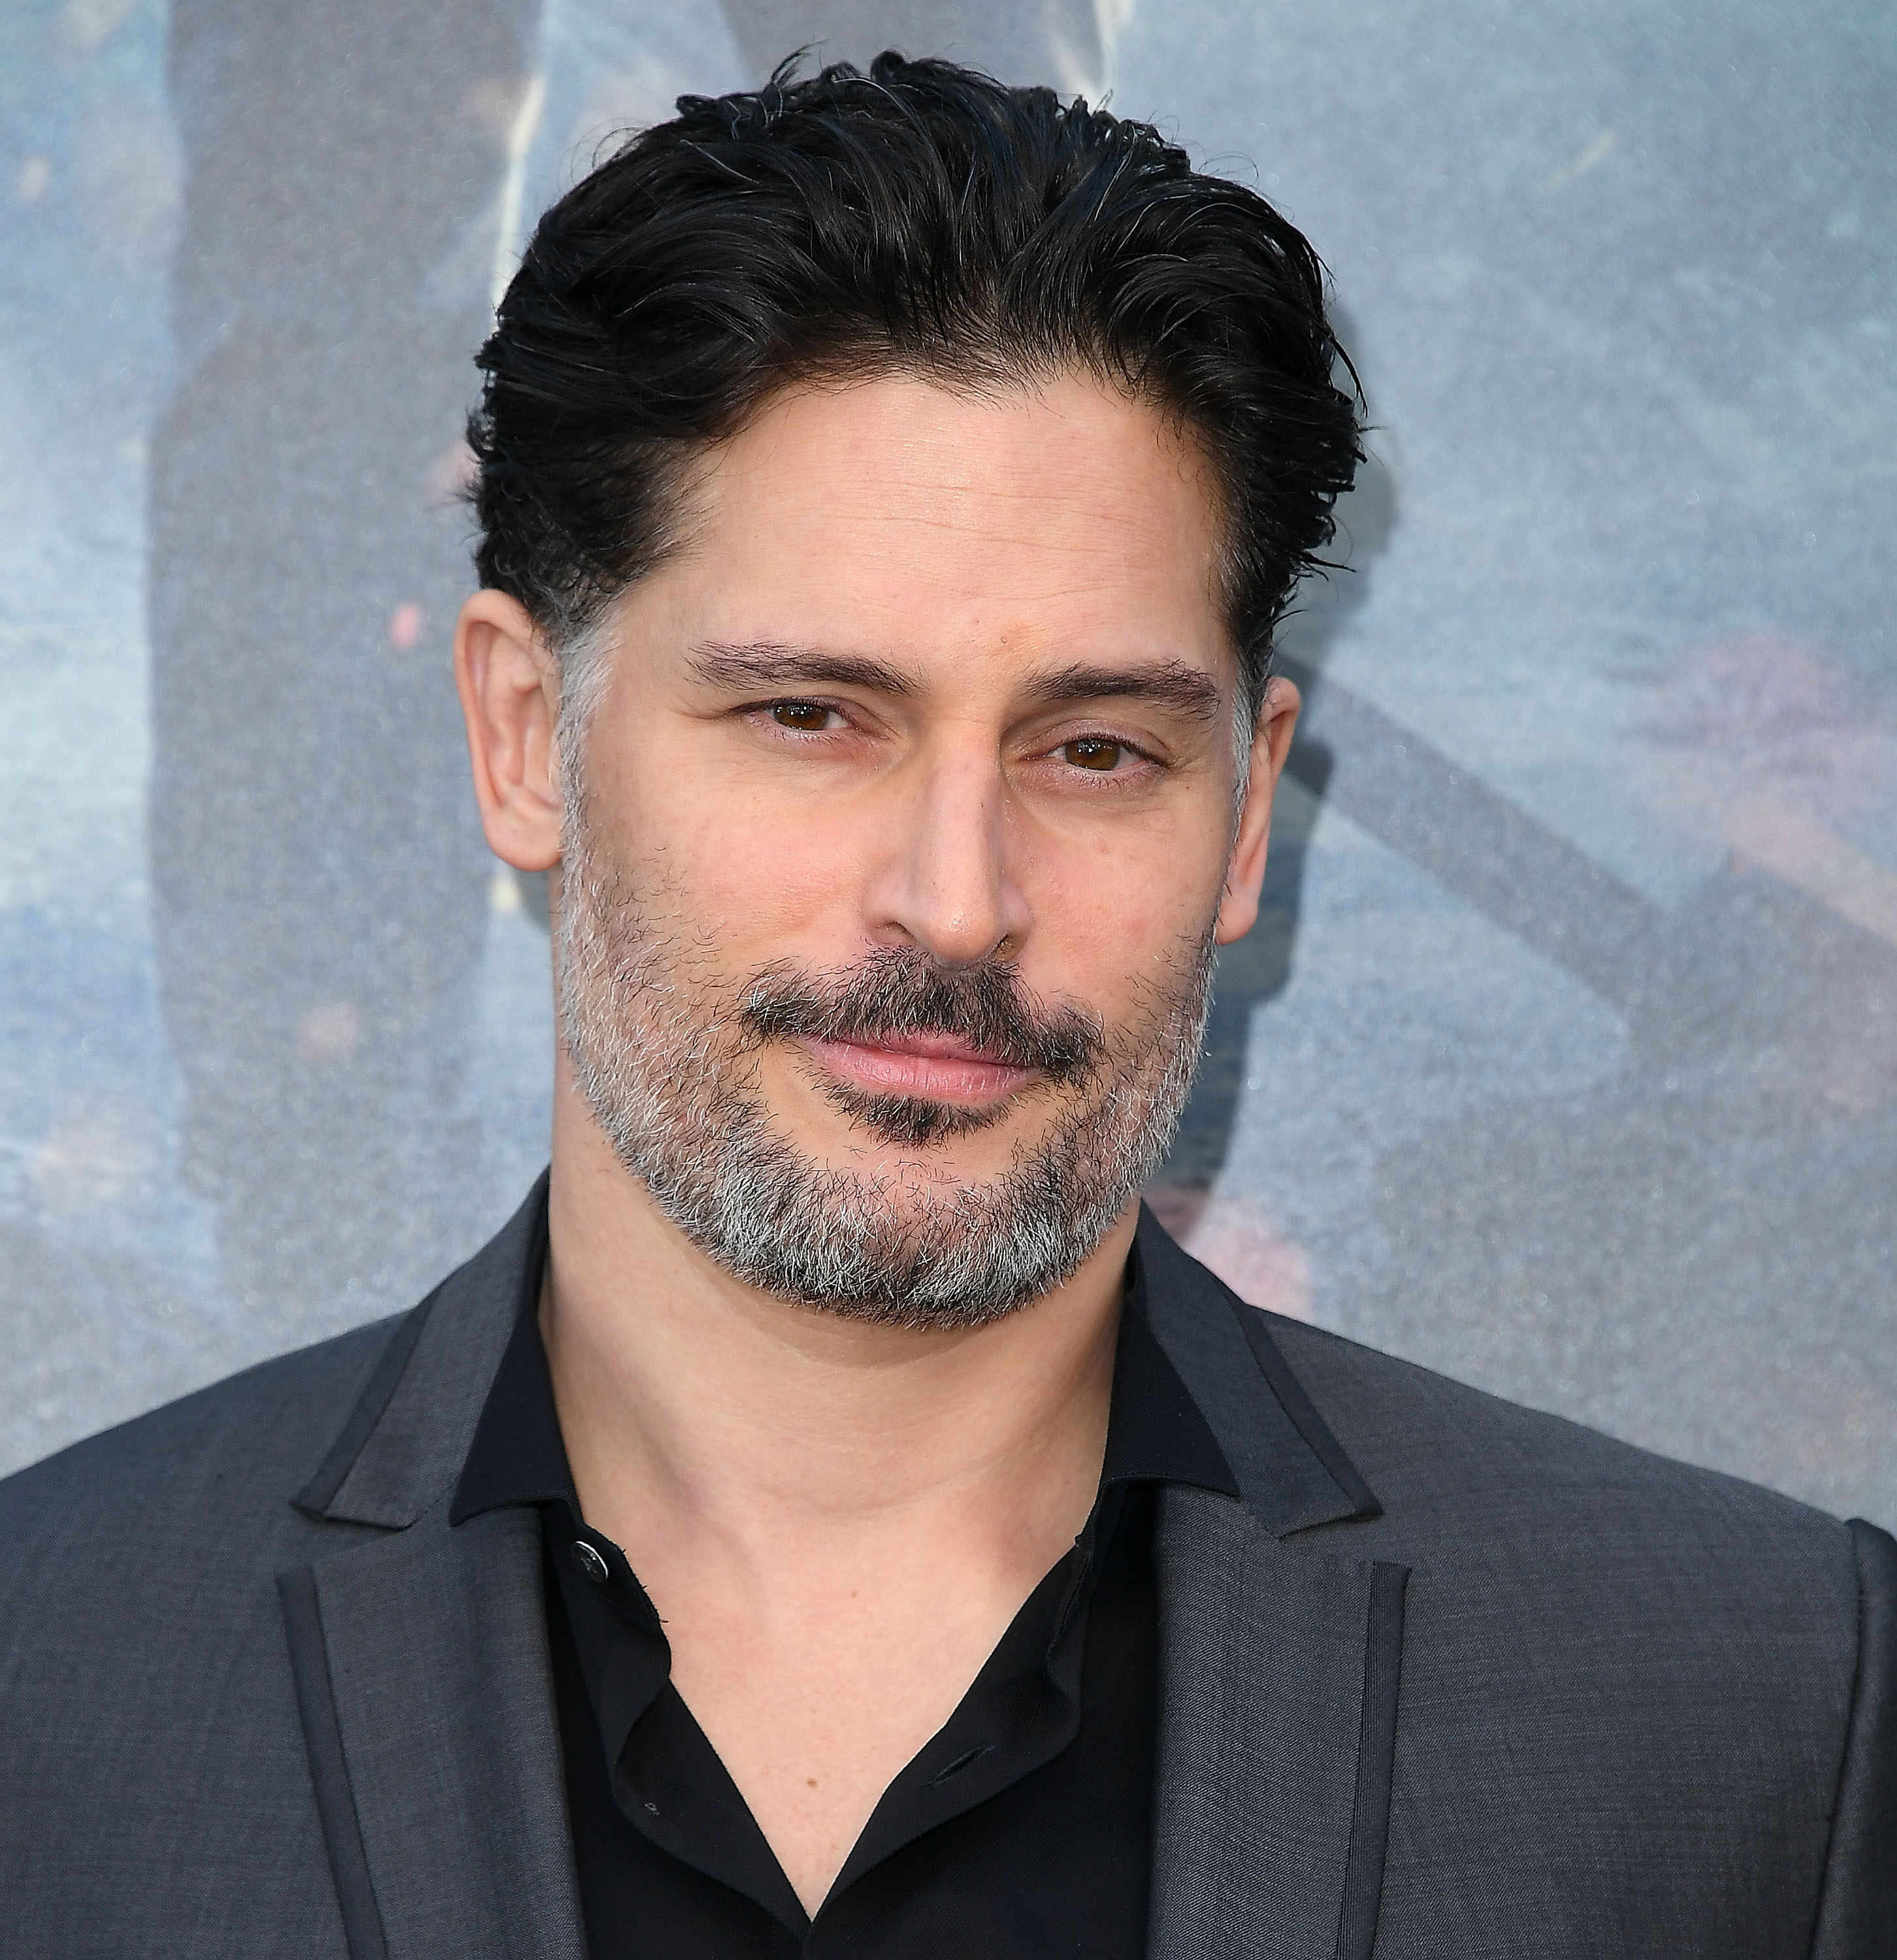 Joe Manganiello attends the "Rampage" premiere on April 4, 2018 in Los Angeles, California | Source: Getty Images